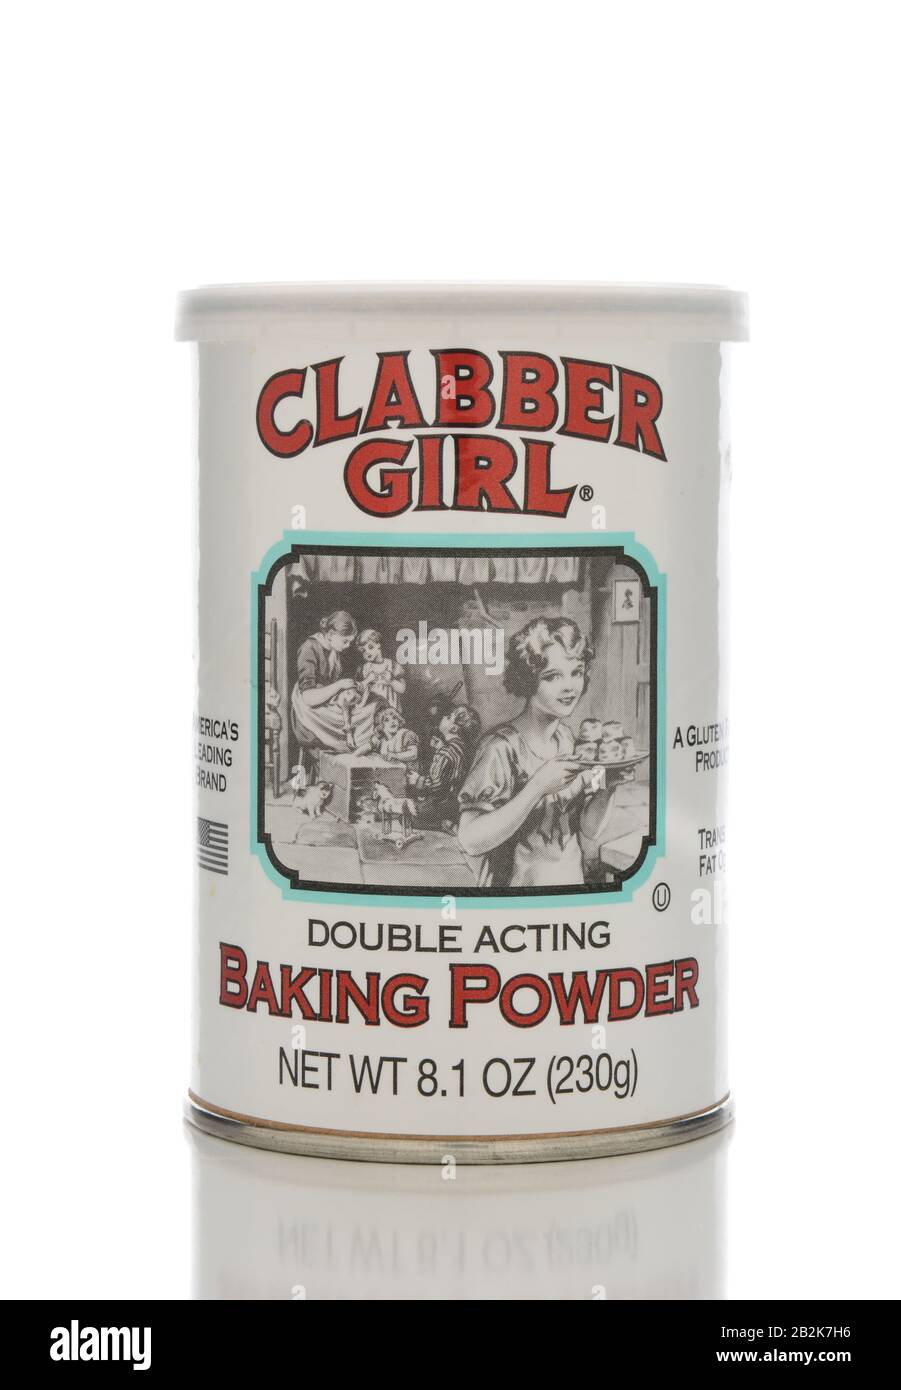 IRVINE, CA - JANUARY 23, 2015: A can of Clabber Girl brand Double Acting Baking Powder. America's Leading Brand is gluten free. Stock Photo